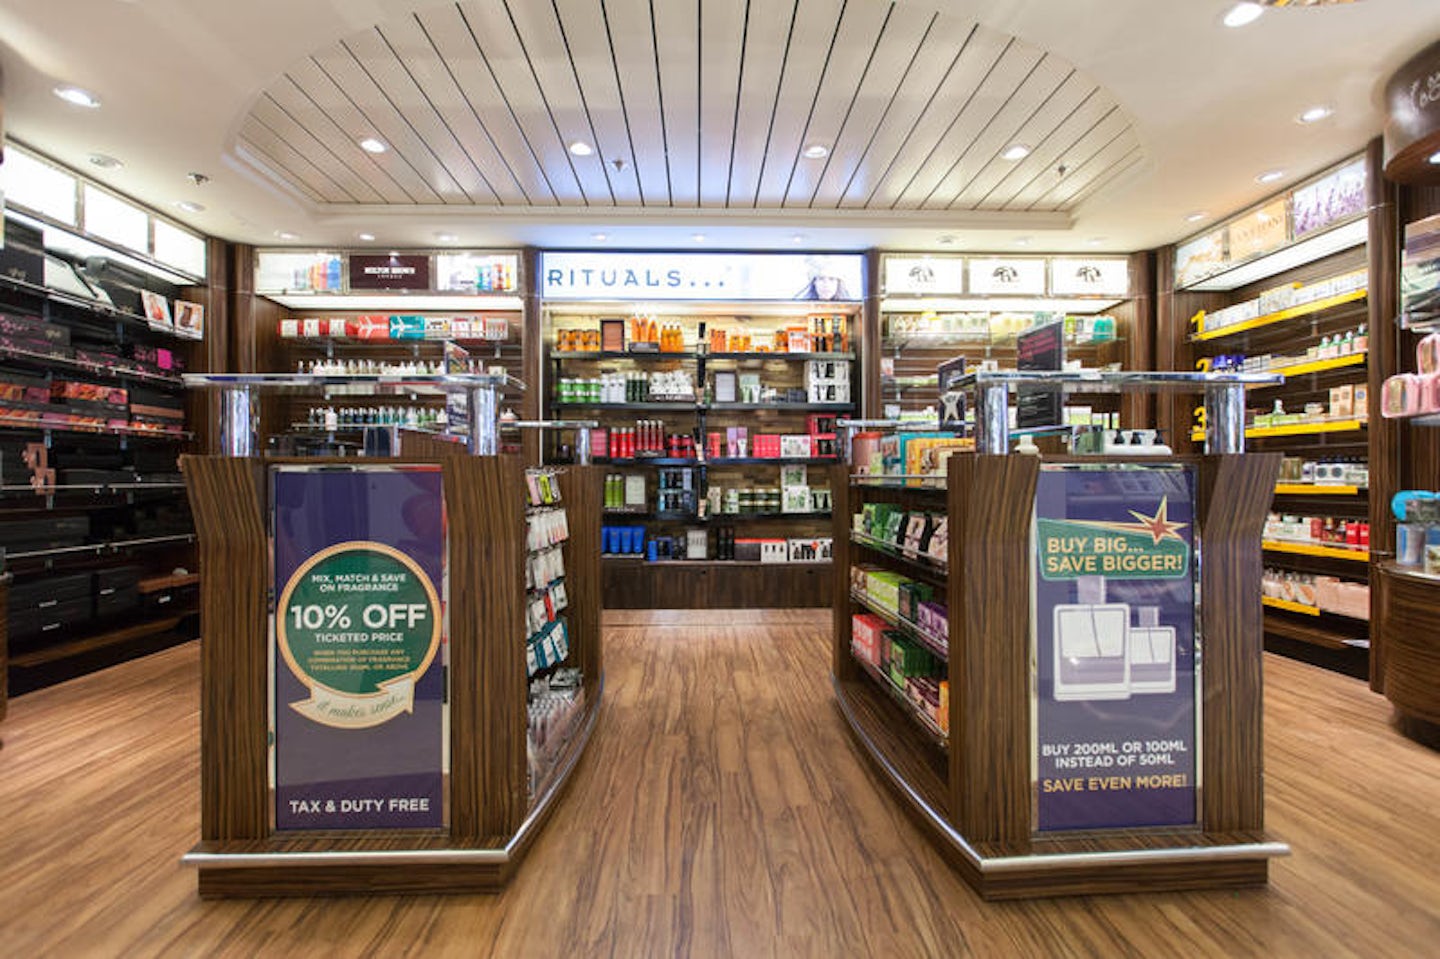 Tax & Duty Free Shop on Independence of the Seas